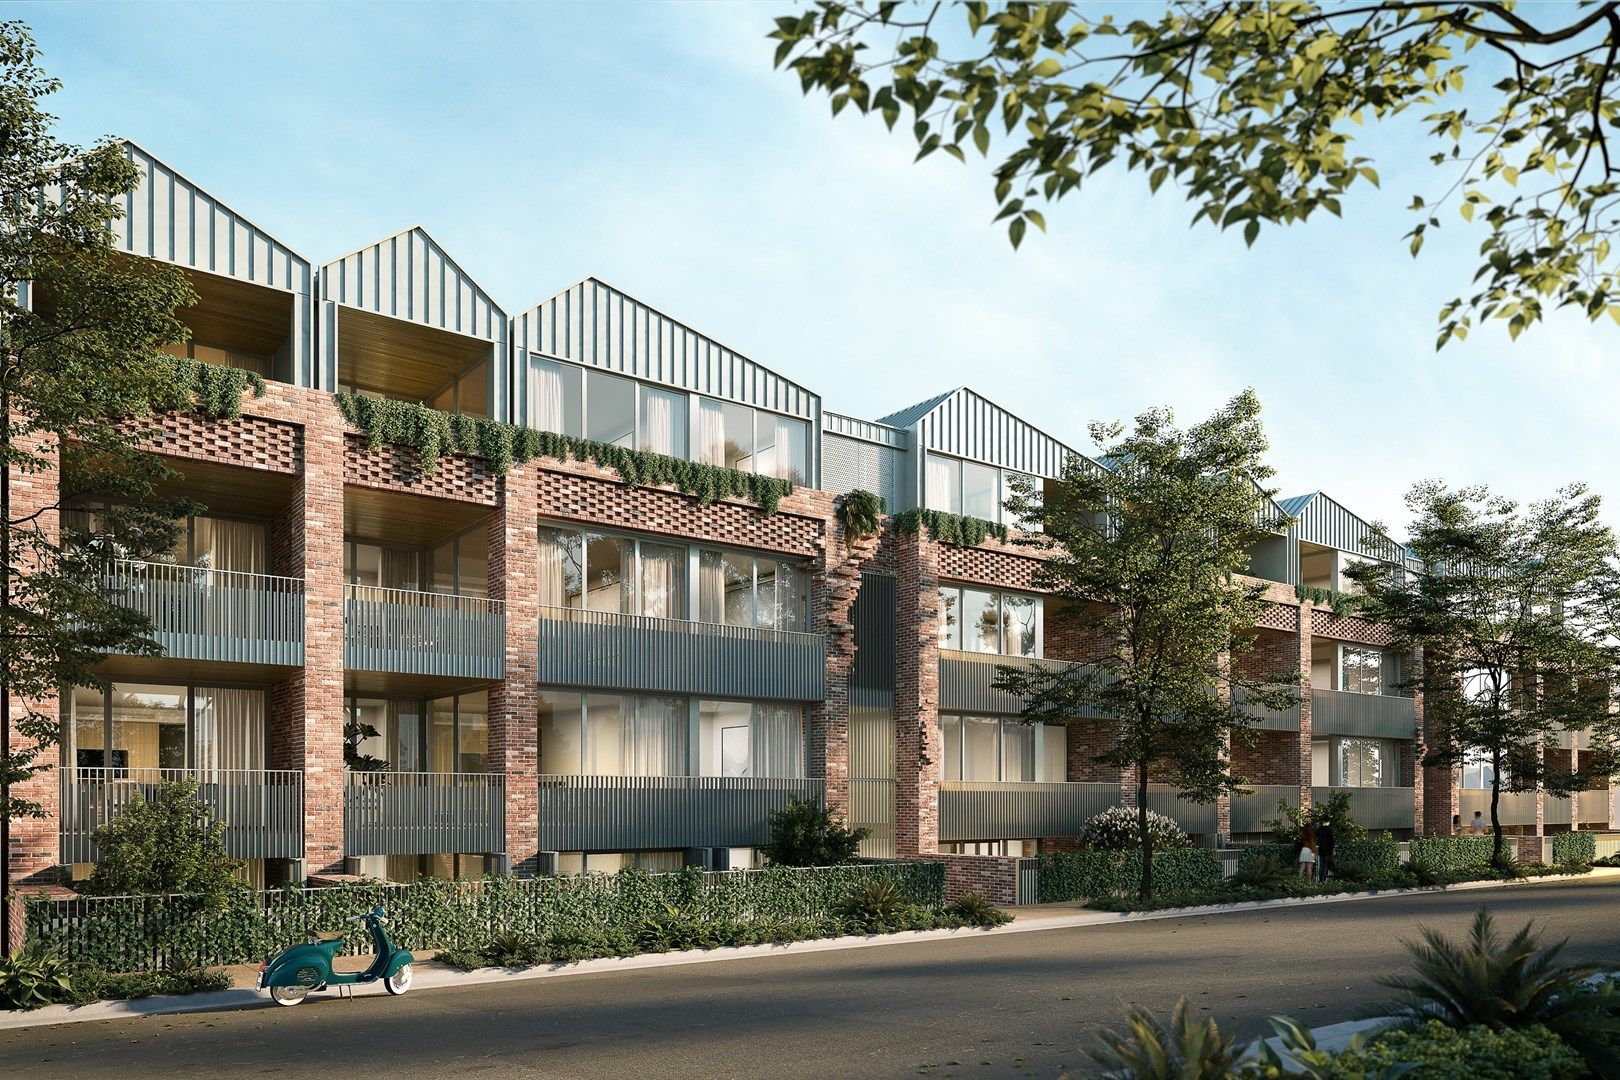 2 bedrooms New Apartments / Off the Plan in D3.06/163 - 173 McEvoy Street ALEXANDRIA NSW, 2015